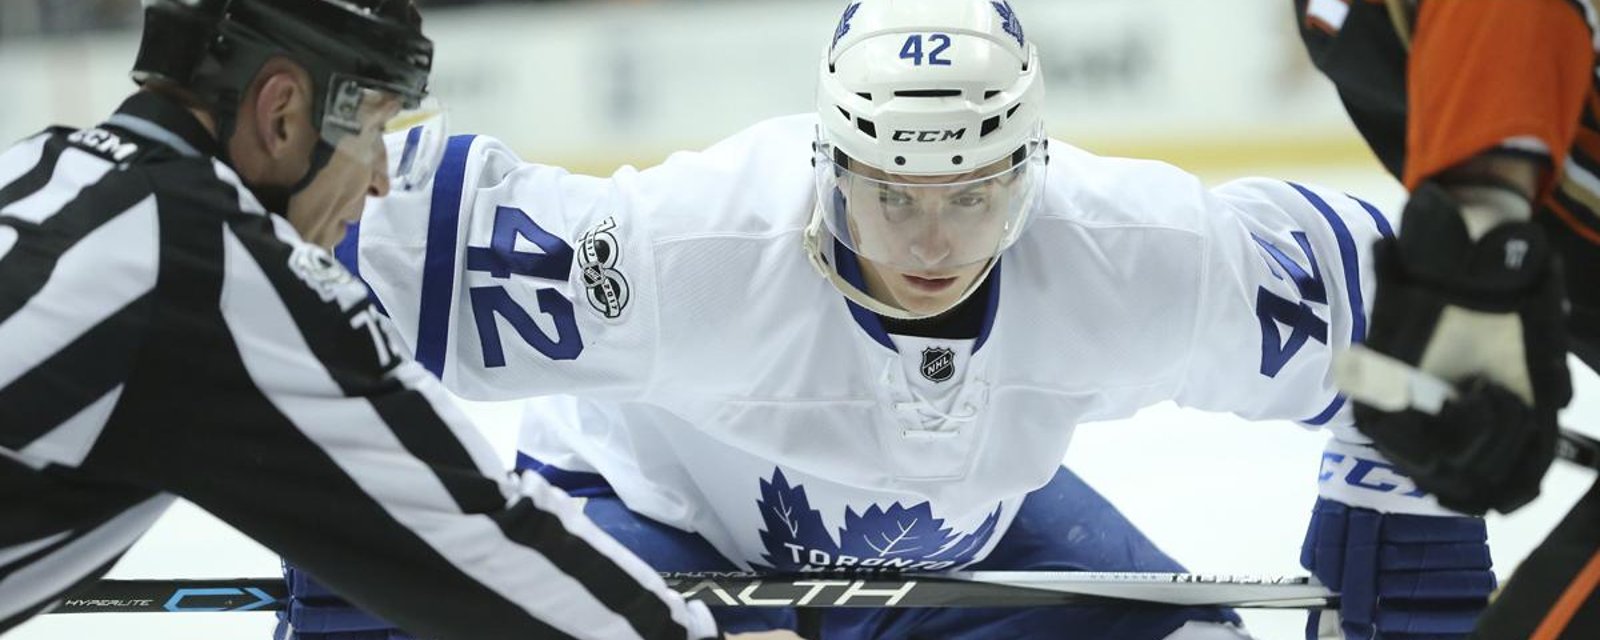 Report: Bozak uncertain about future with Leafs